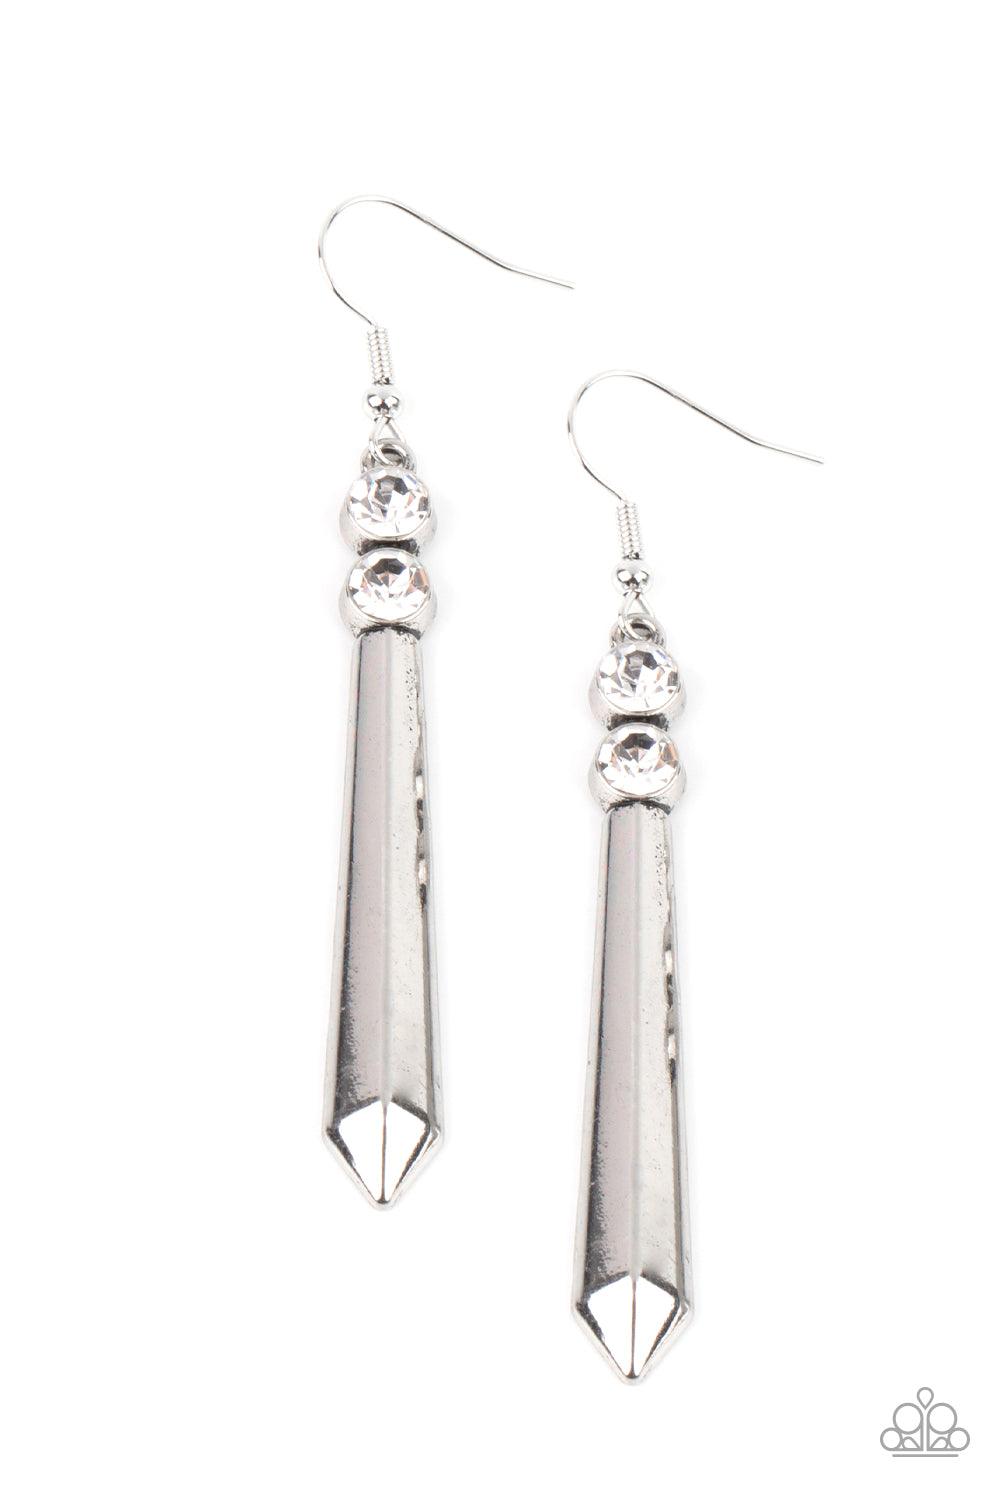 Paparazzi Accessories Sparkle Stream - White A pair of glittery white rhinestones crowns a flared silver rod, creating a sharp-looking lure. Earring attaches to a standard fishhook fitting. Sold as one pair of earrings. Jewelry